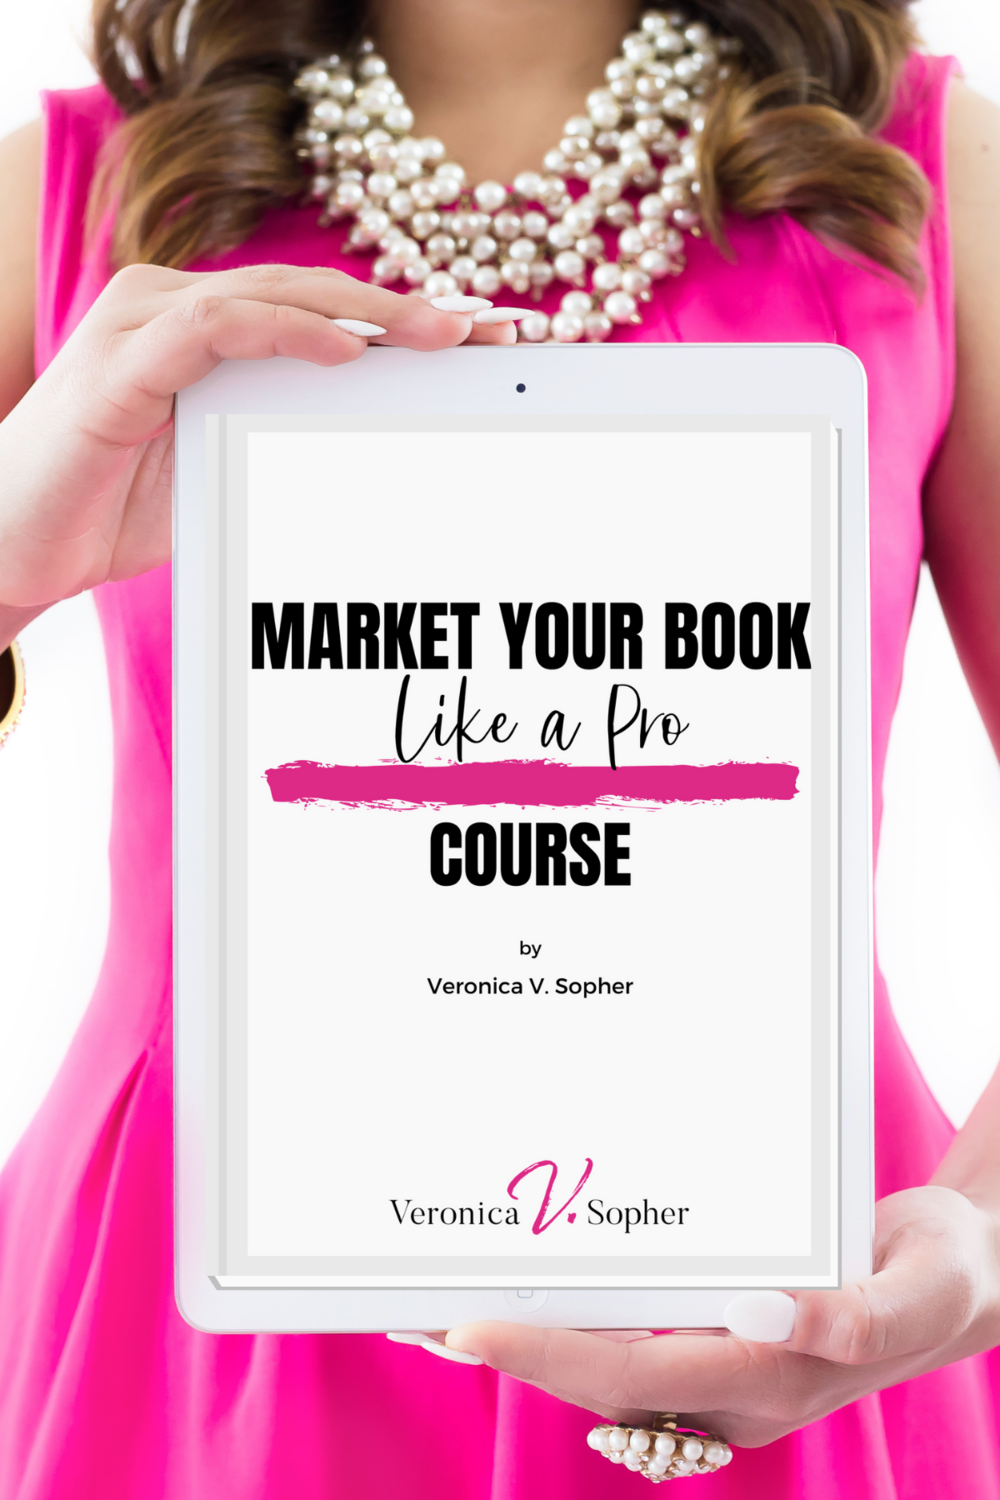 Market Your Book by Veronica V. Sopher